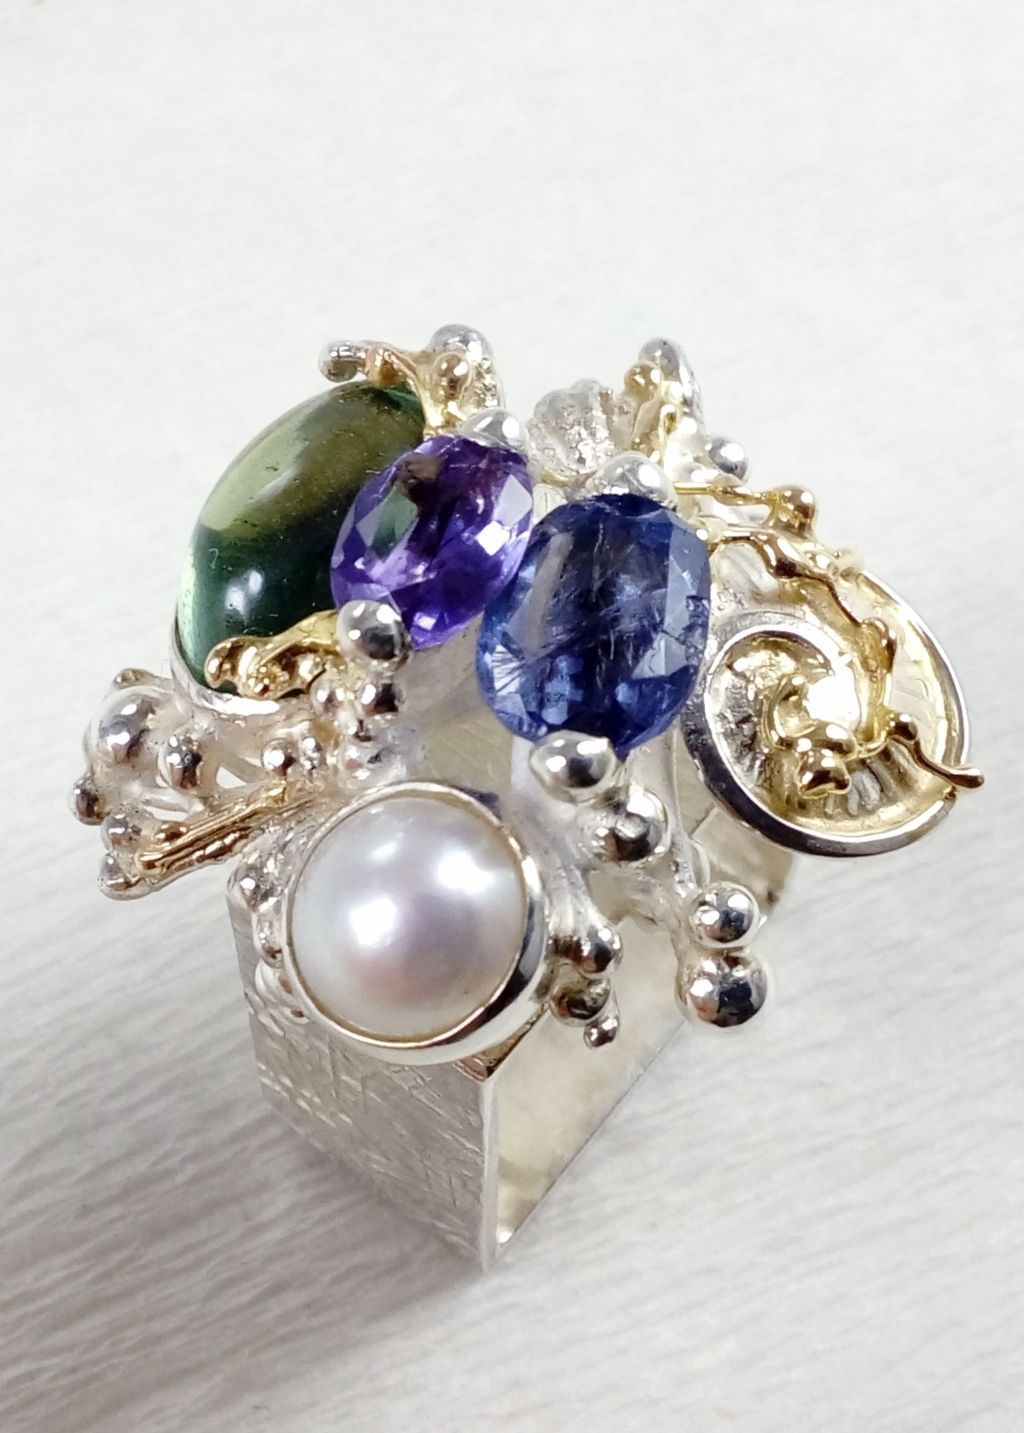 jewelry made from gold and silver, jewelry with color stones, jewelry with real pearls, gregory pyra piro square ring 4821, where to find an auction house with gemstones and jewellery, fine craft gallery handcrafted ring for sale, sterling silver and 14 karat gold ring, ring with amethyst, fluorite, iolite and pearl, one of a kind handcrafted ring, where to find auctions with fine art and designer jewellery, where to buy gregory pyra piro jewelry right now